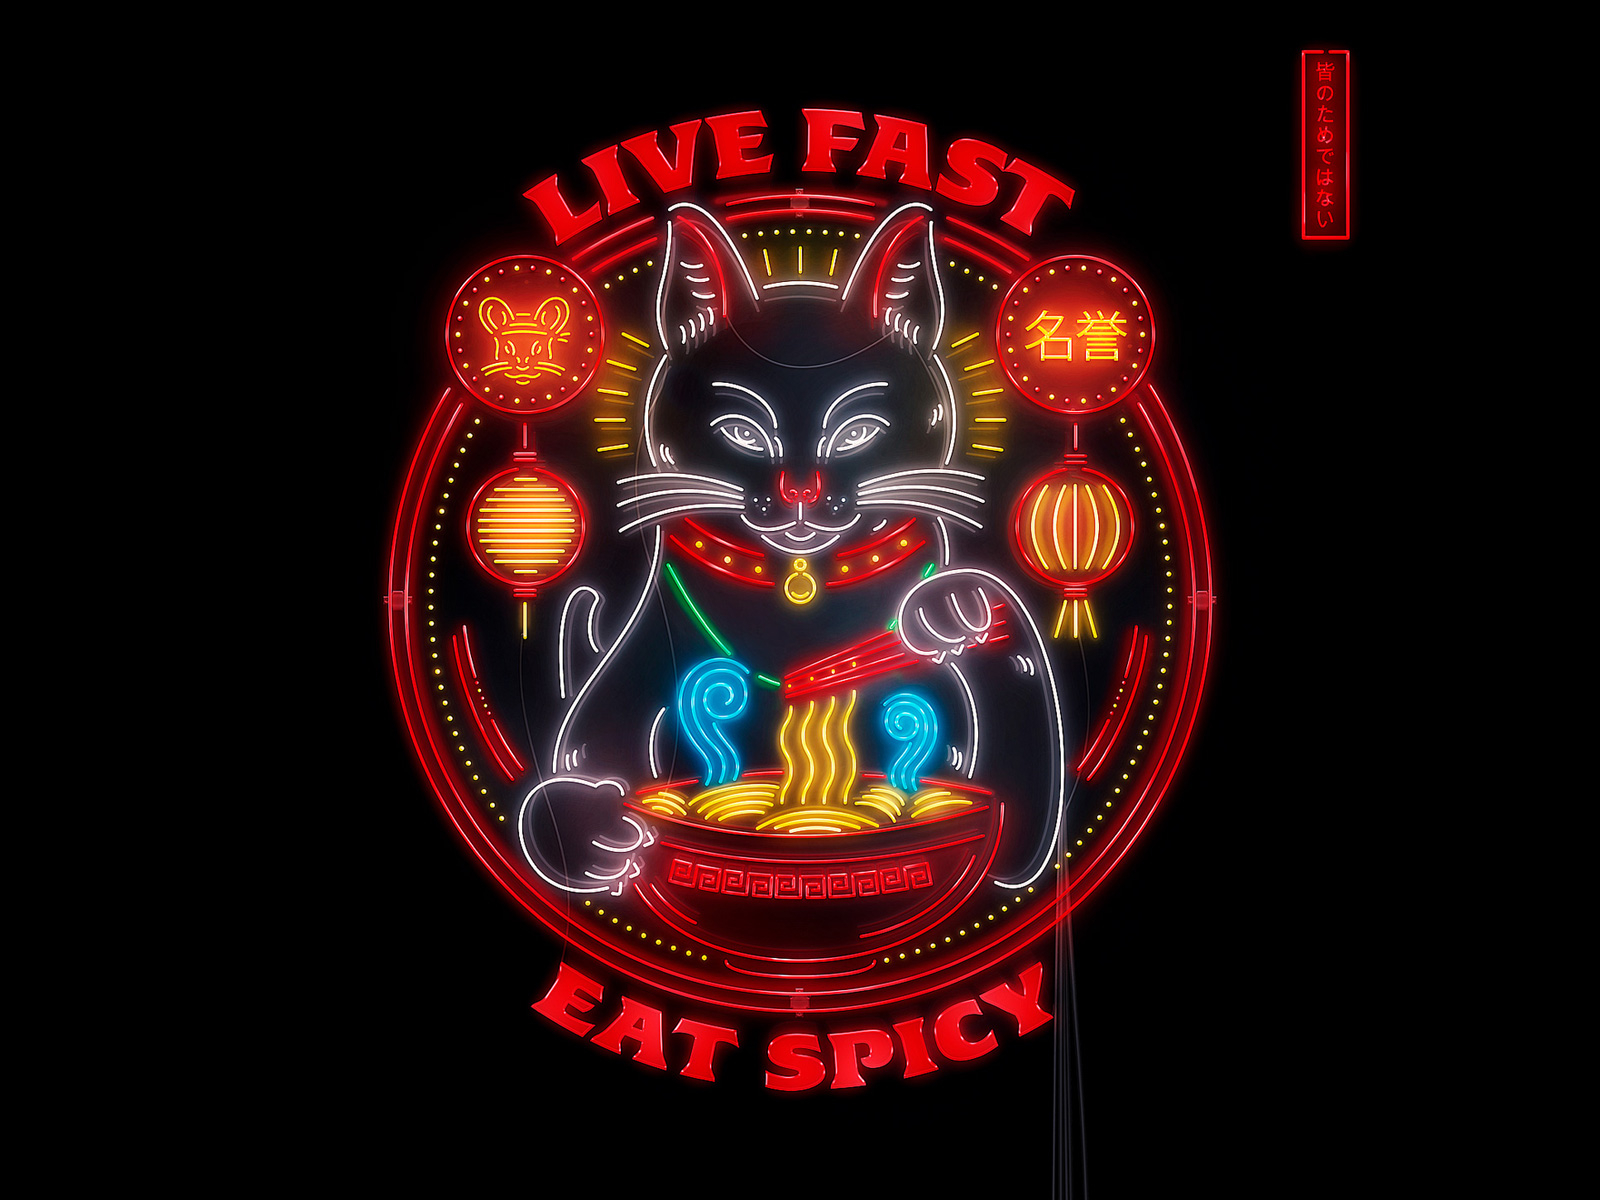 Live Fast, Eat Spicy 🍜 asian culture cat drawing graphic design illustration japanese jeffrey dirkse light tube mascot neon neon lights neon sign restaurant signage spicy food vector artwork